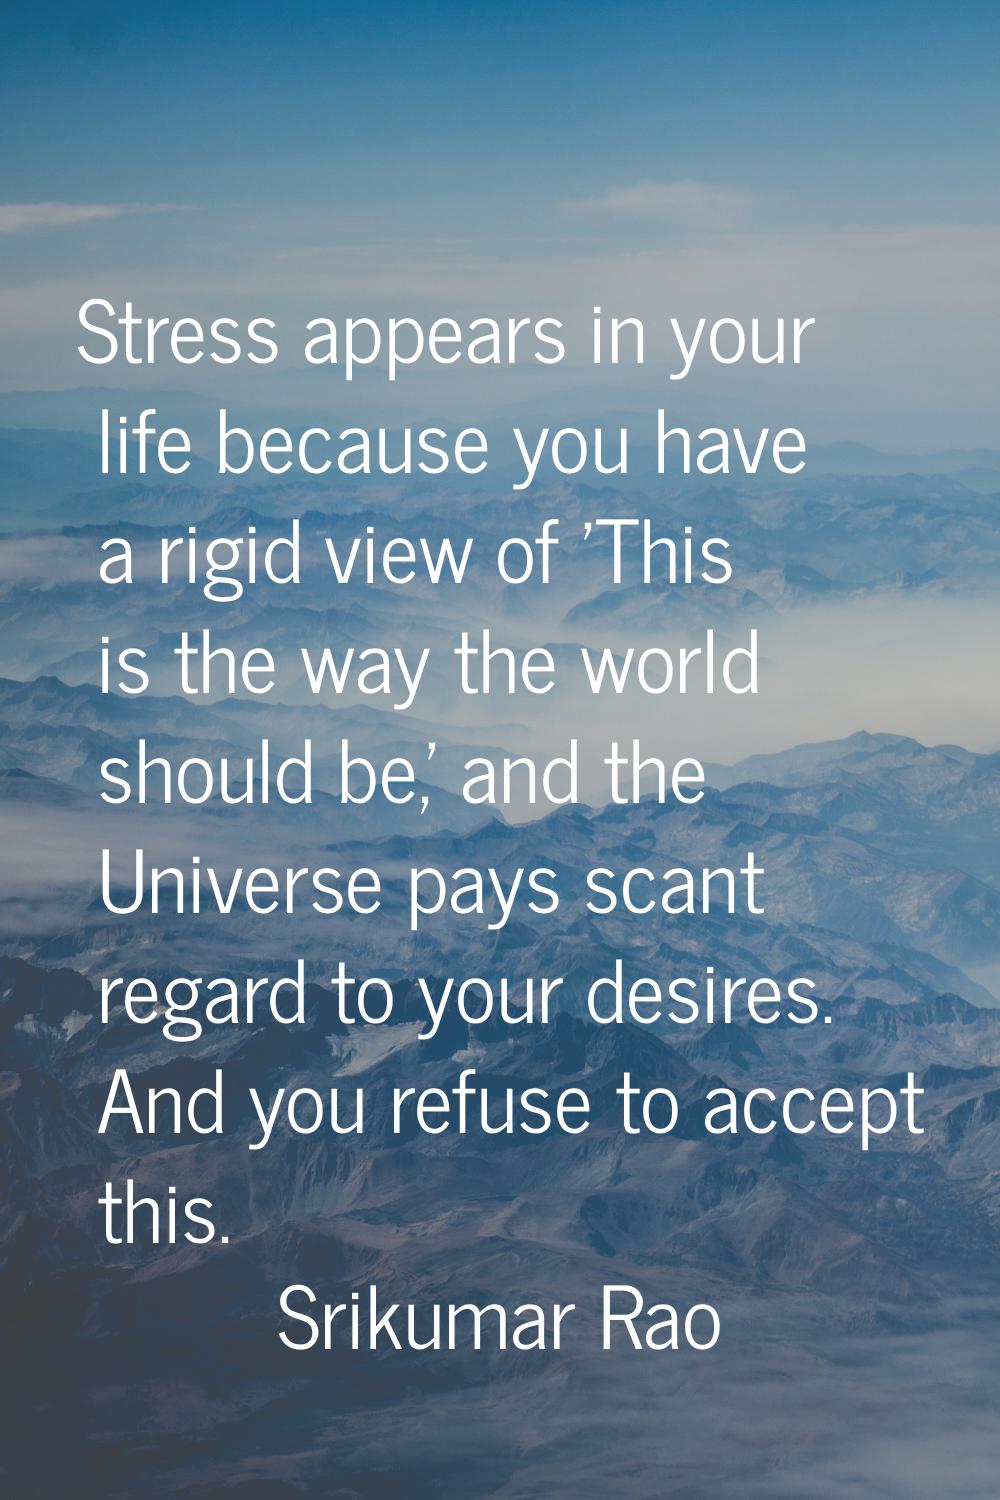 Stress appears in your life because you have a rigid view of 'This is the way the world should be,'